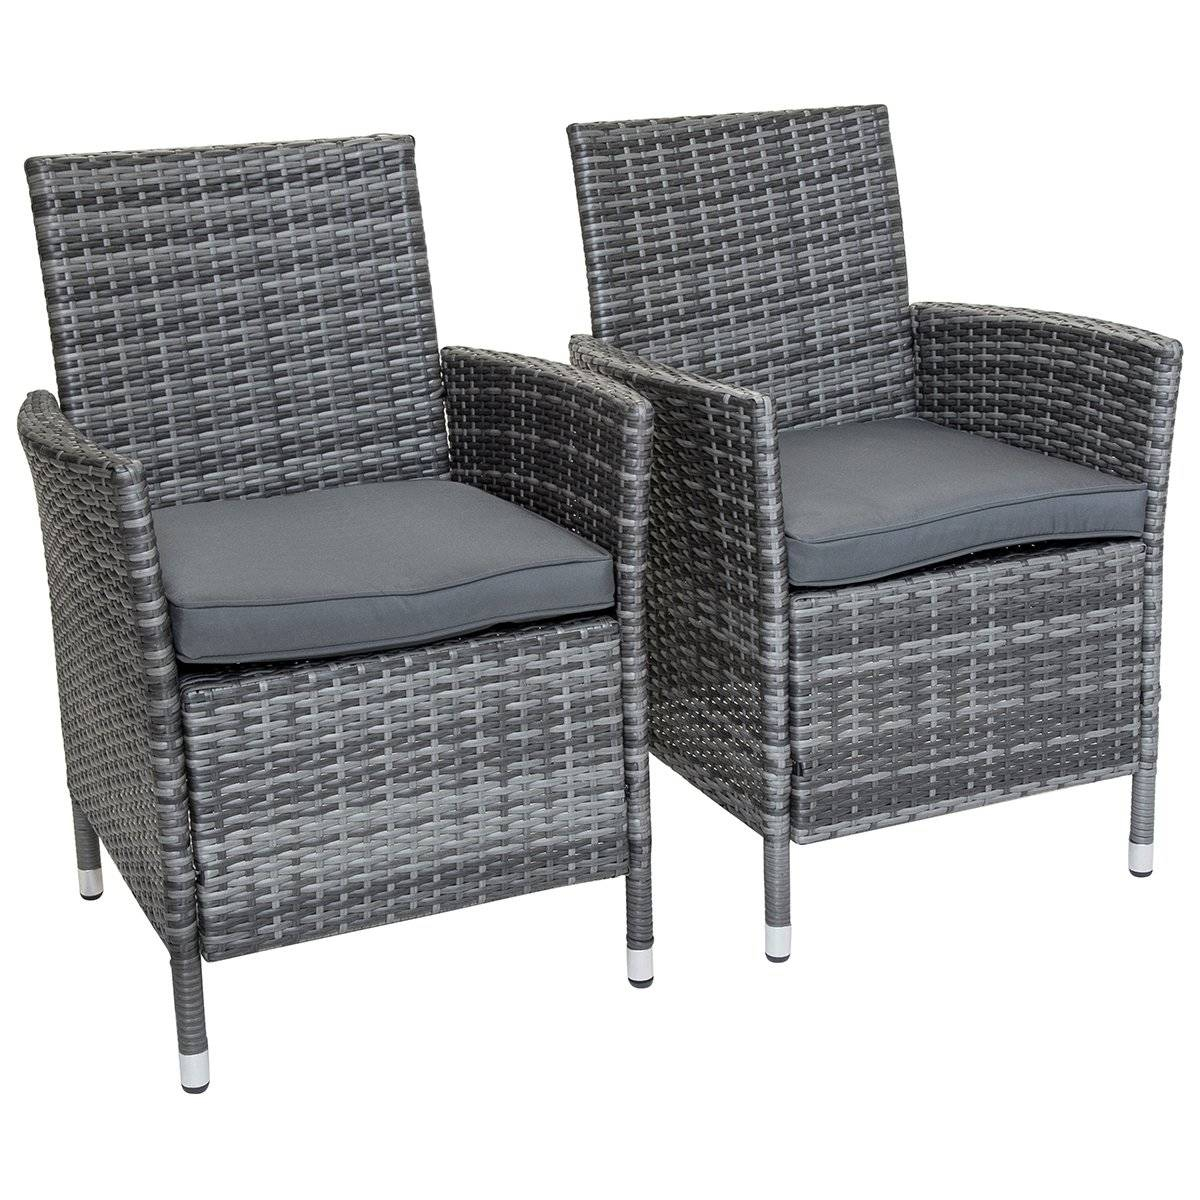 Pair Rattan Dining Chairs Grey Delightful Outdoor Furniture throughout size 1200 X 1200